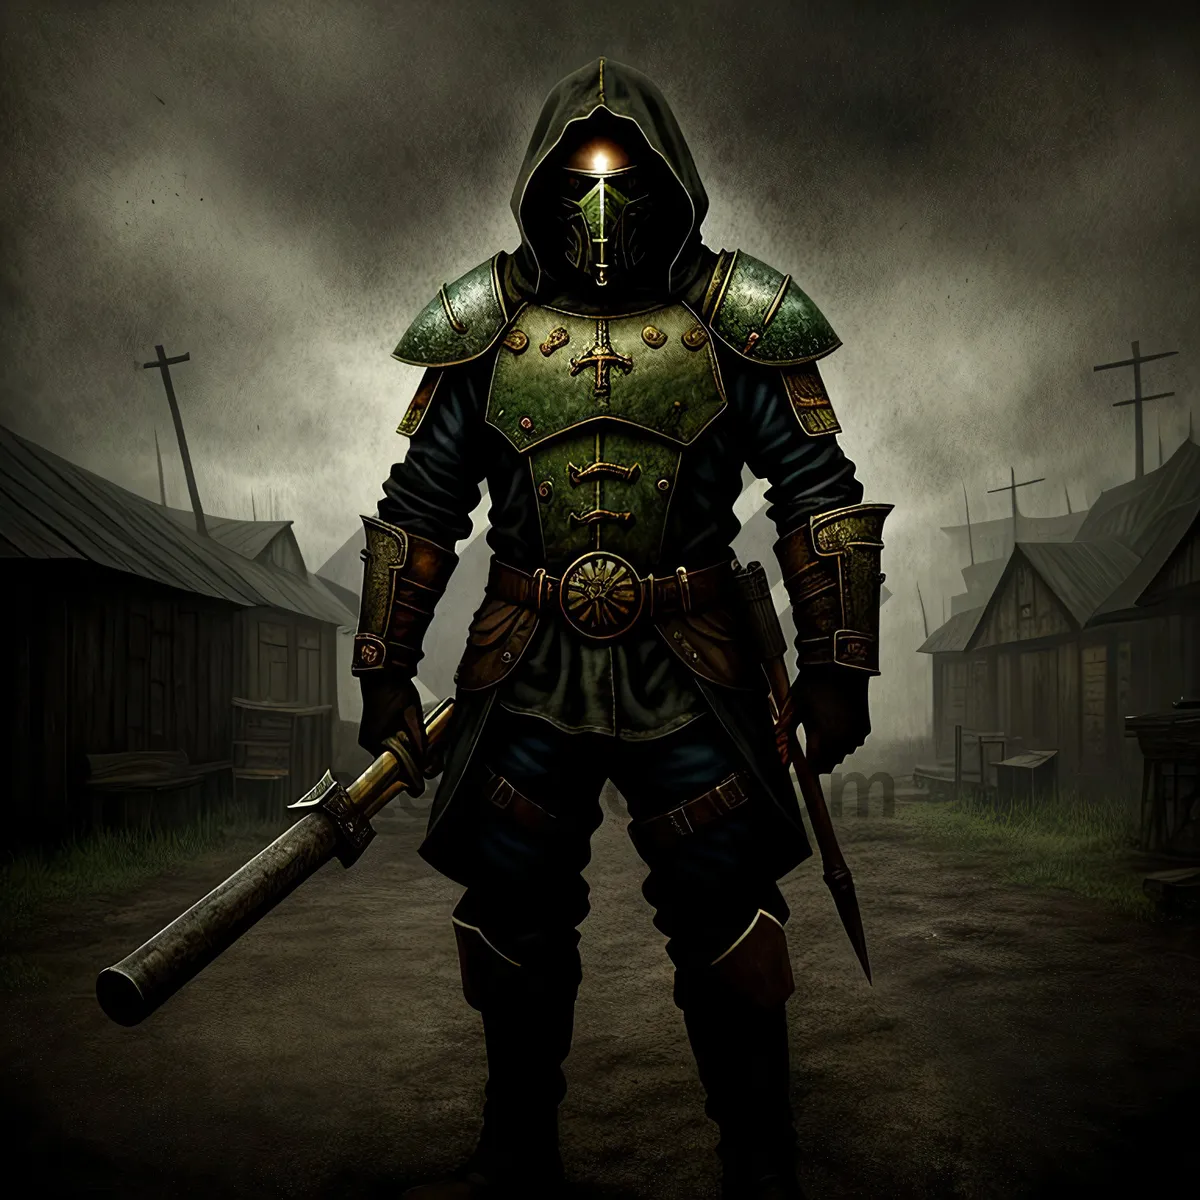 Picture of Combat-ready soldier in full military armor with halberd